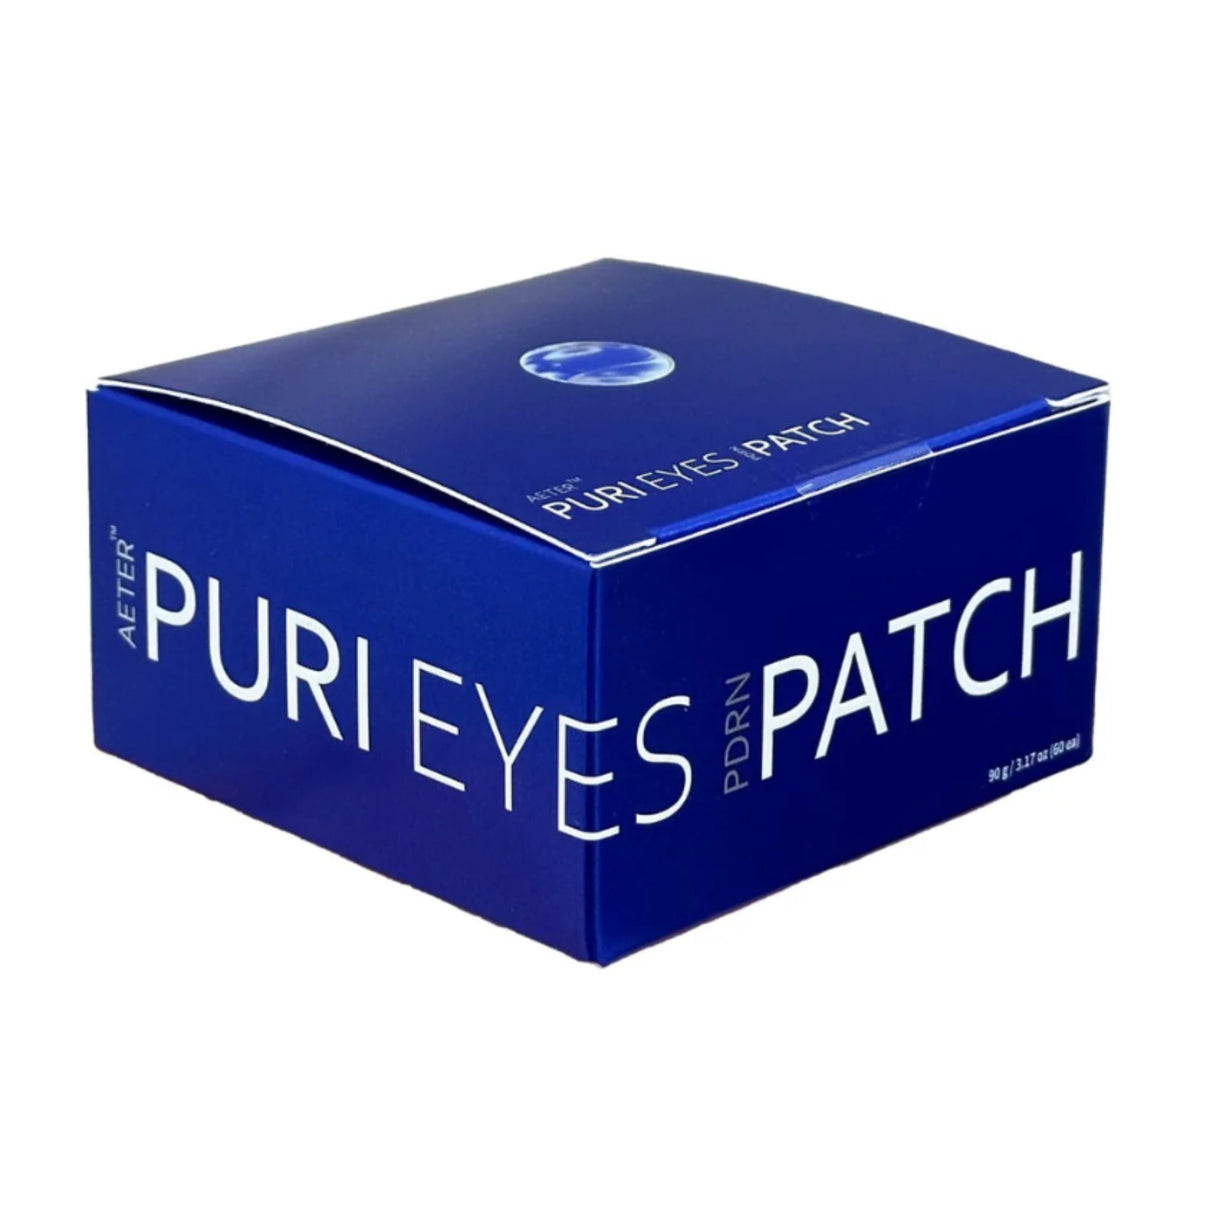 Puri Eyes PDRN Patches - Filler Lux™ - SKIN CARE - Aeter